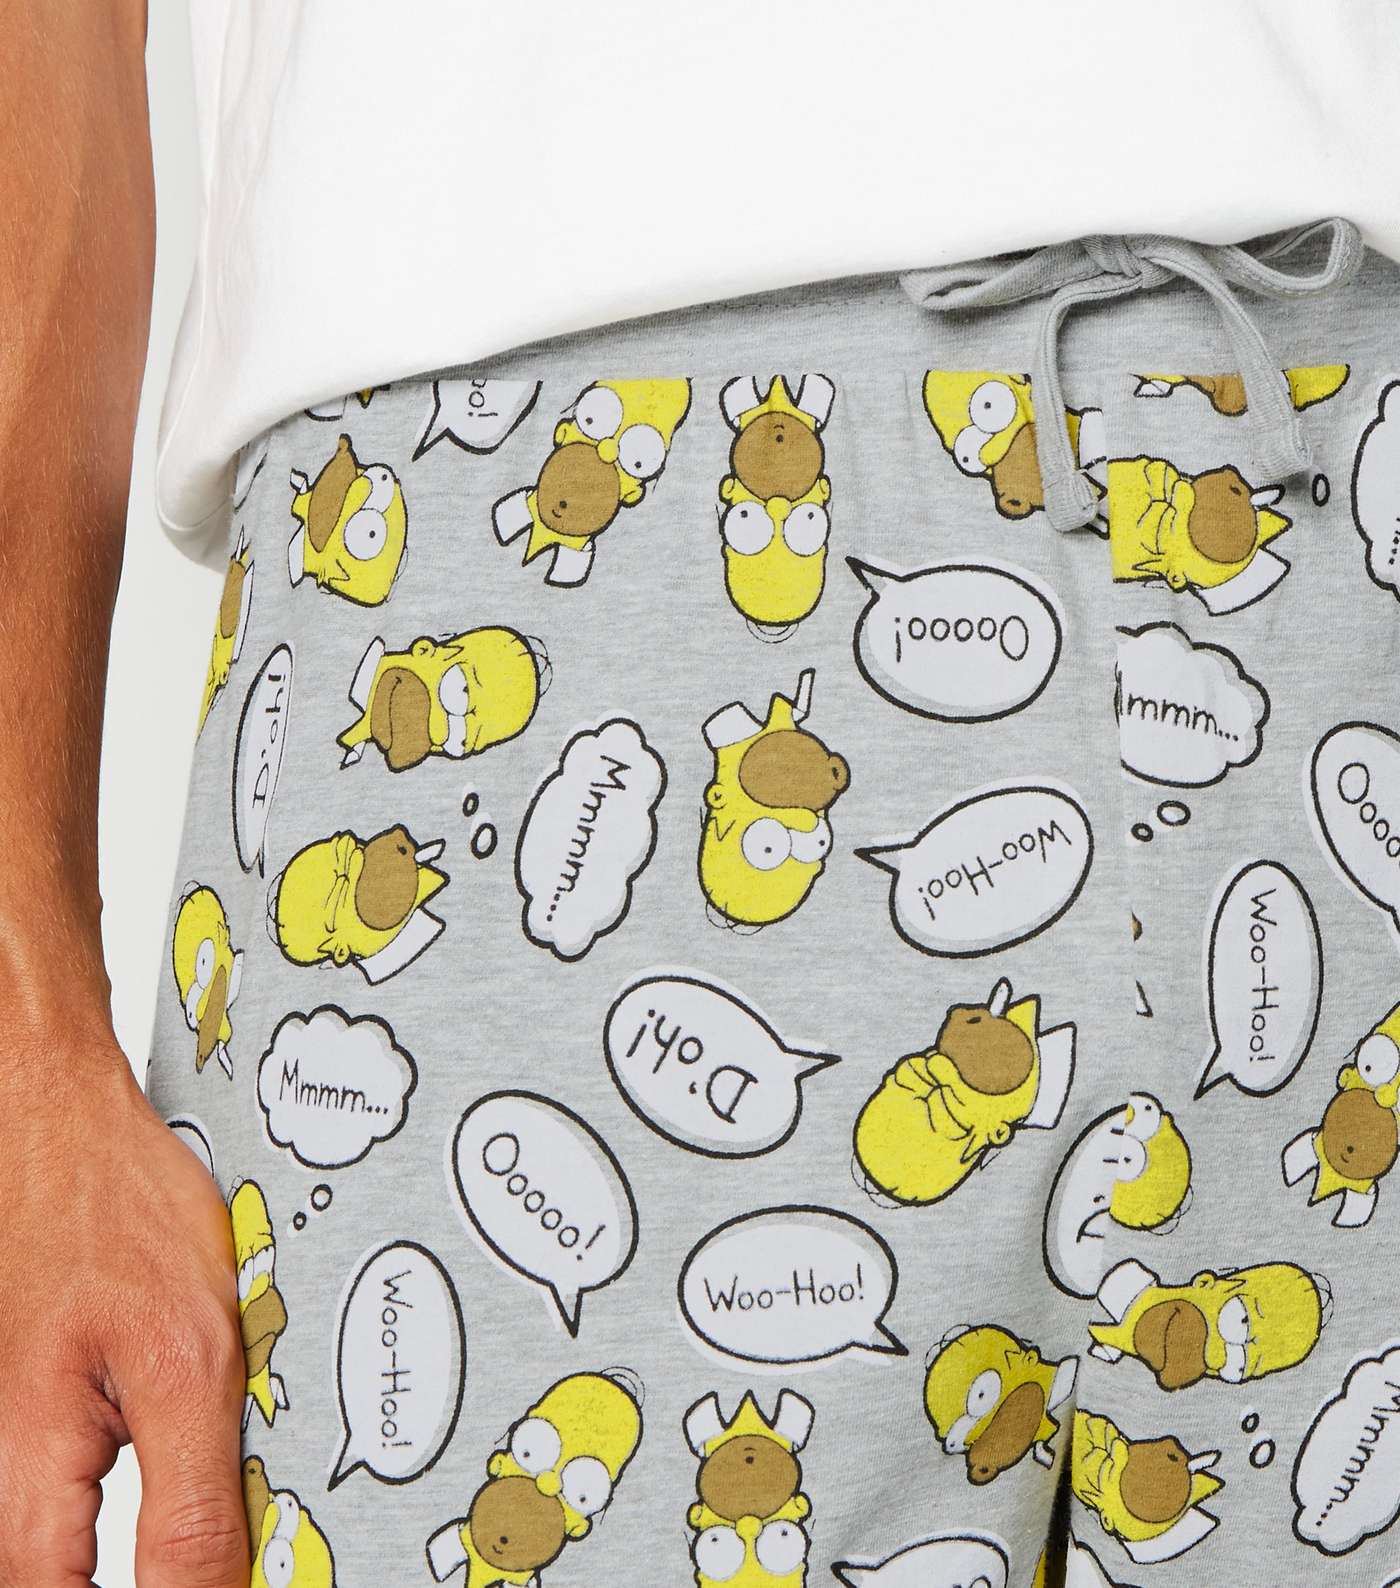 Grey Marl The Simpsons Homer Joggers Image 5